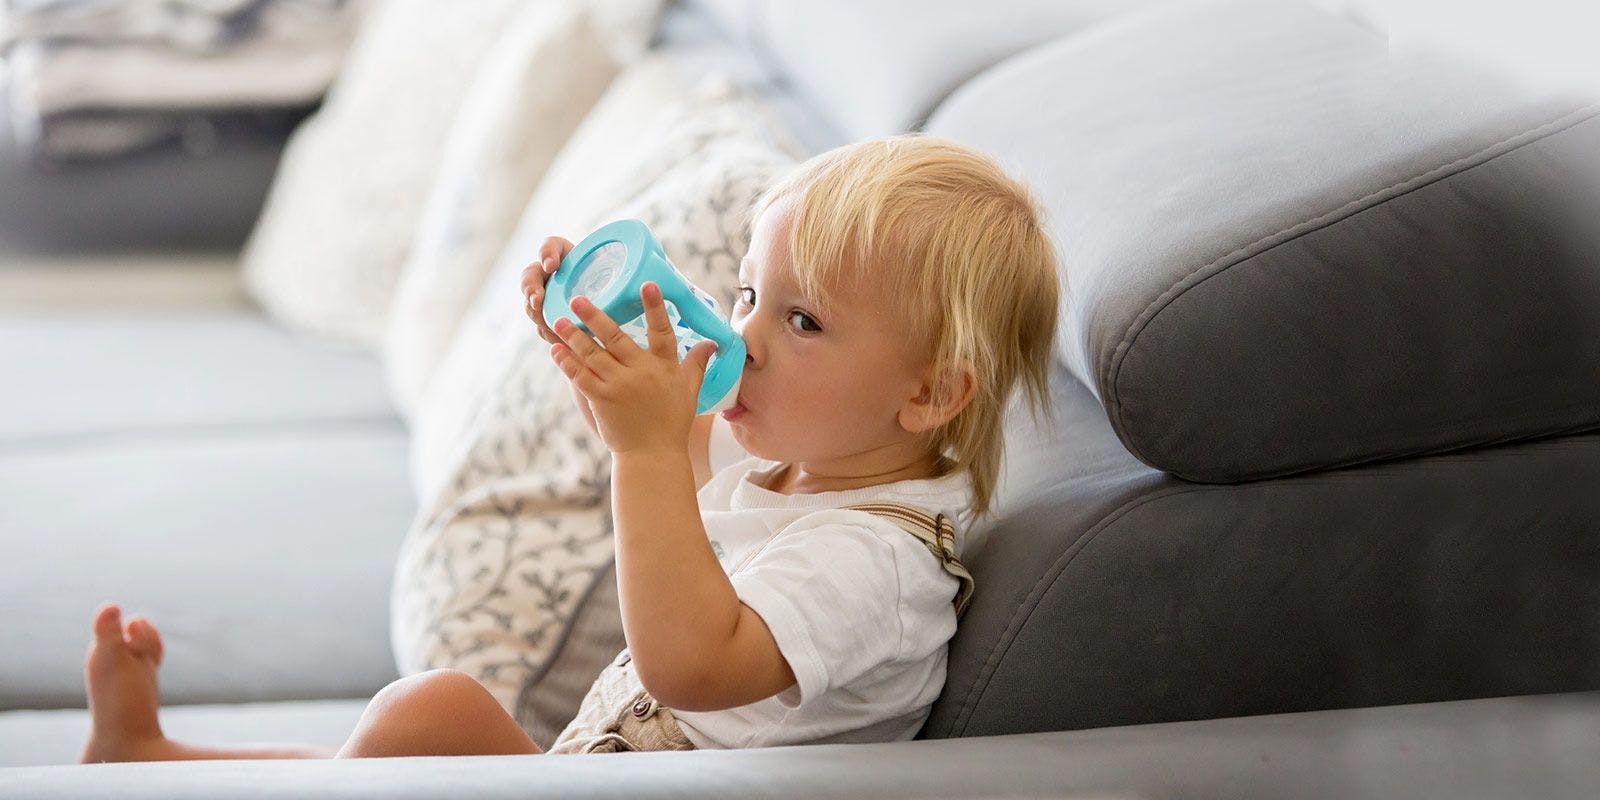 Child drinking milk in a sippy cup on the couch.